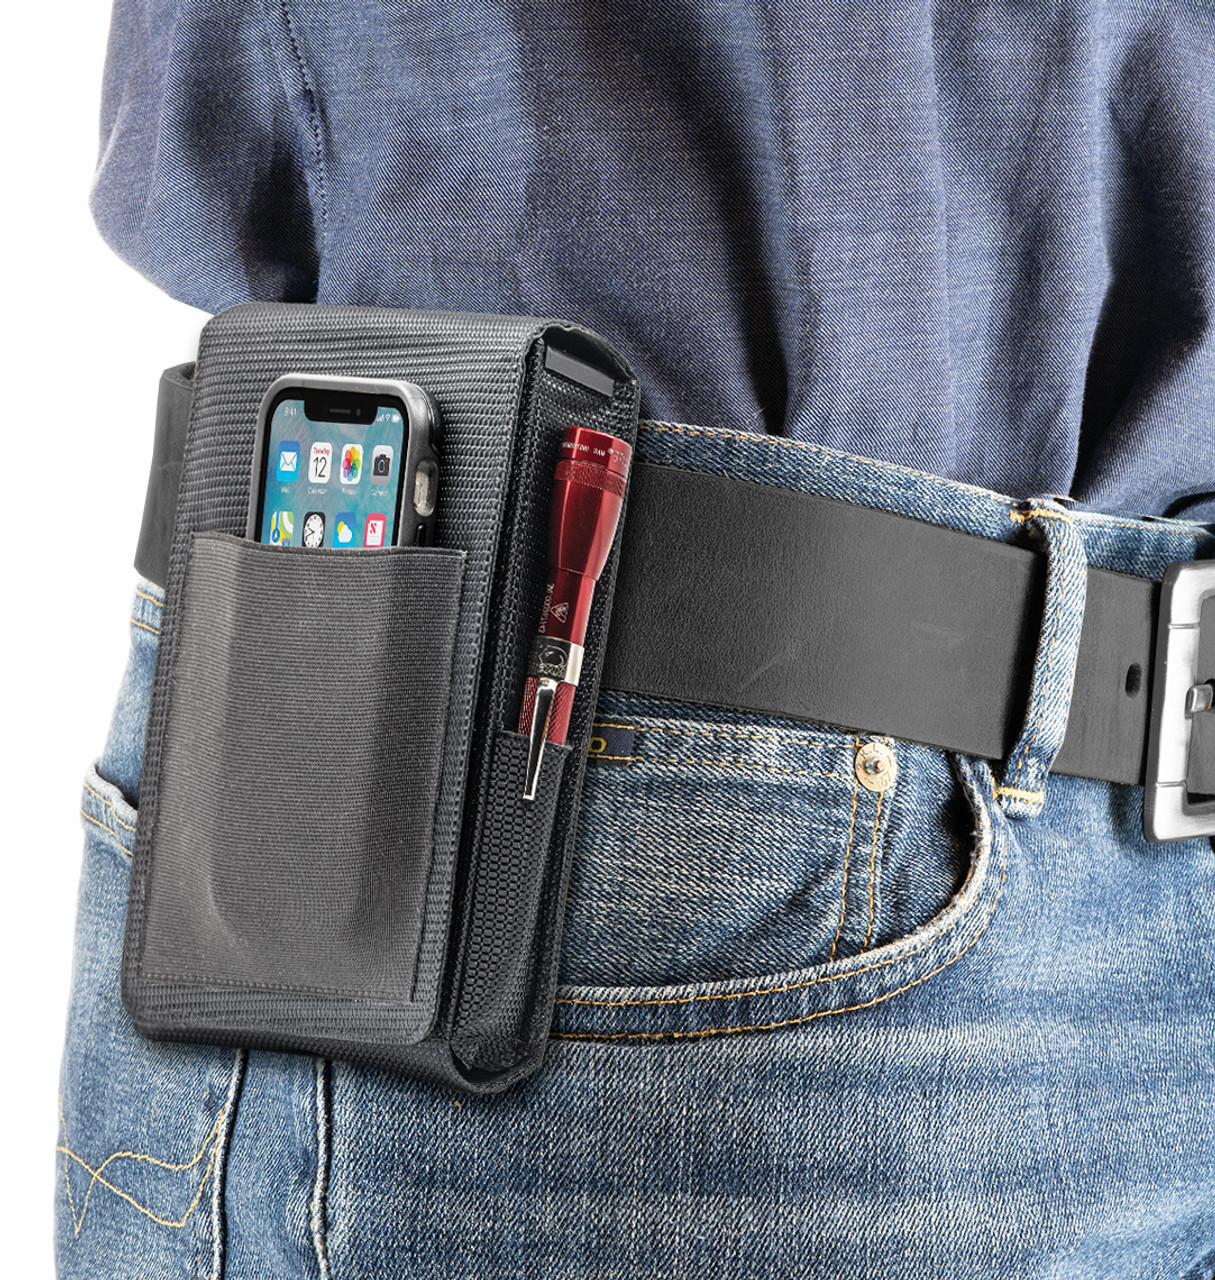 The Double Tap Perfect Holster